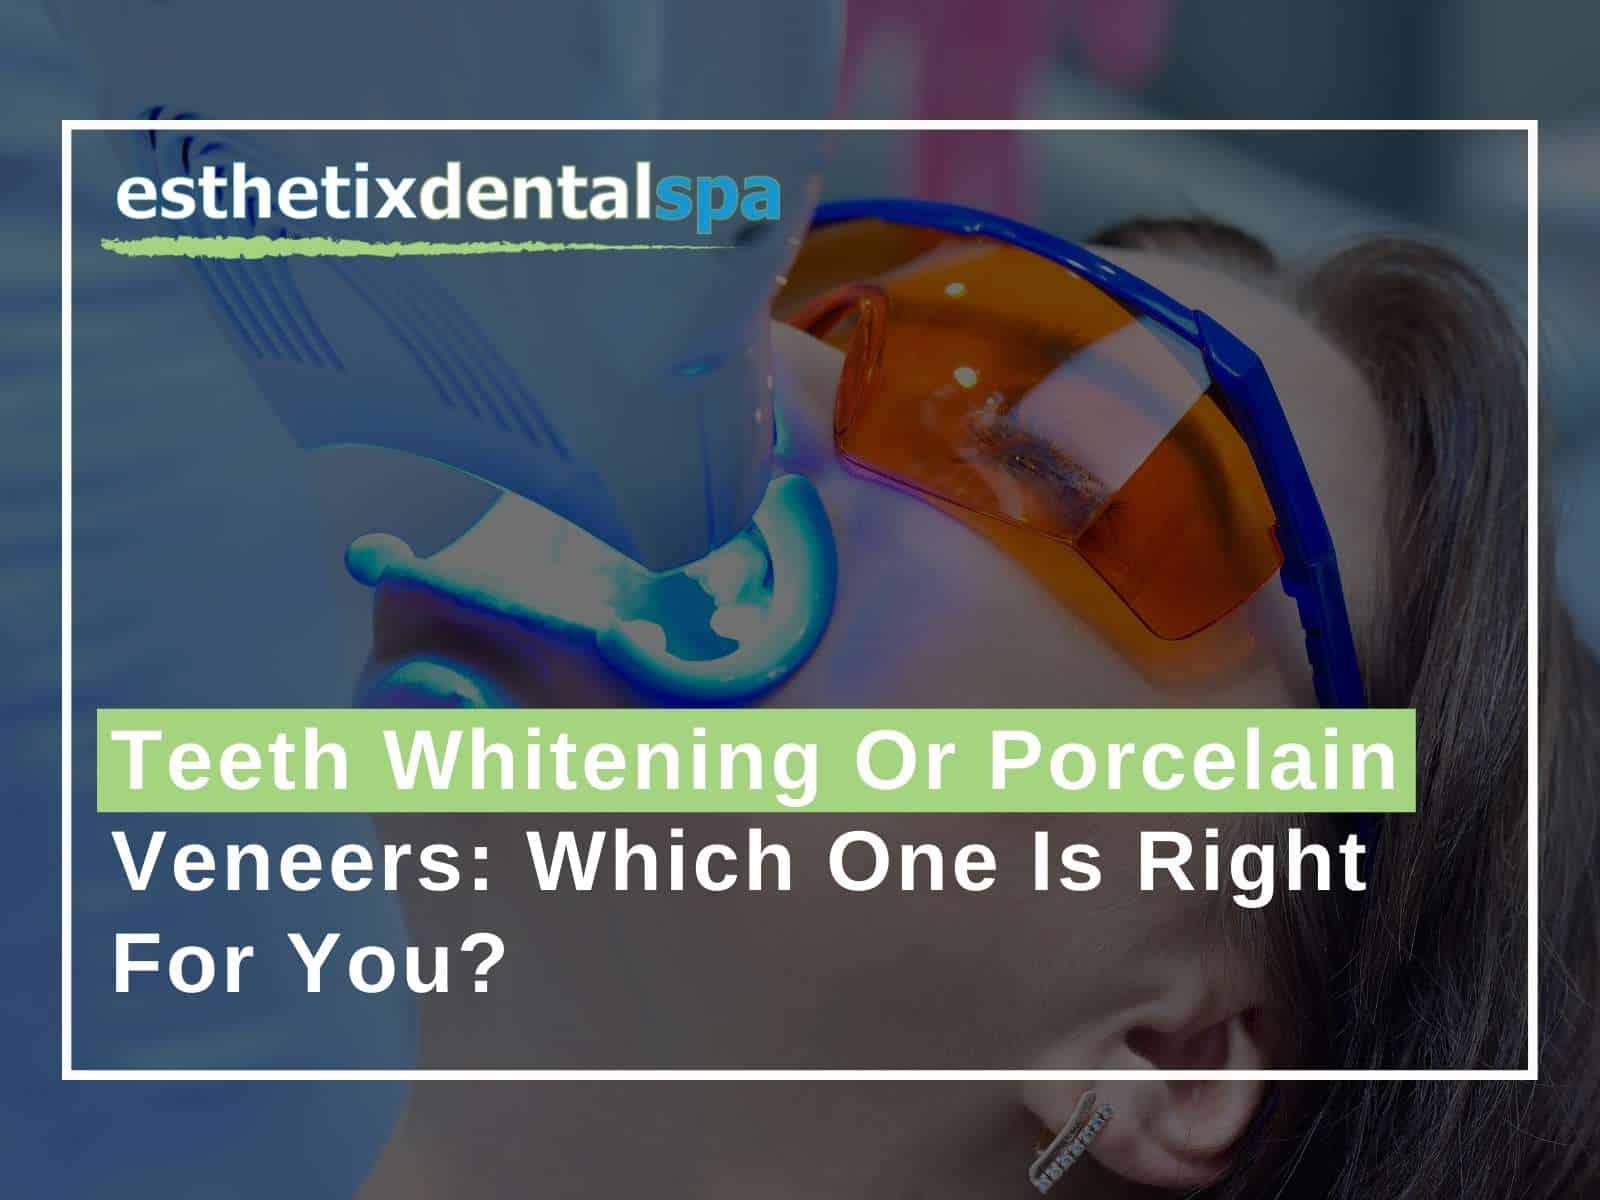 eeth-Whitening-Or-Porcelain-Veneers-Which-One-Is-Right-For-You